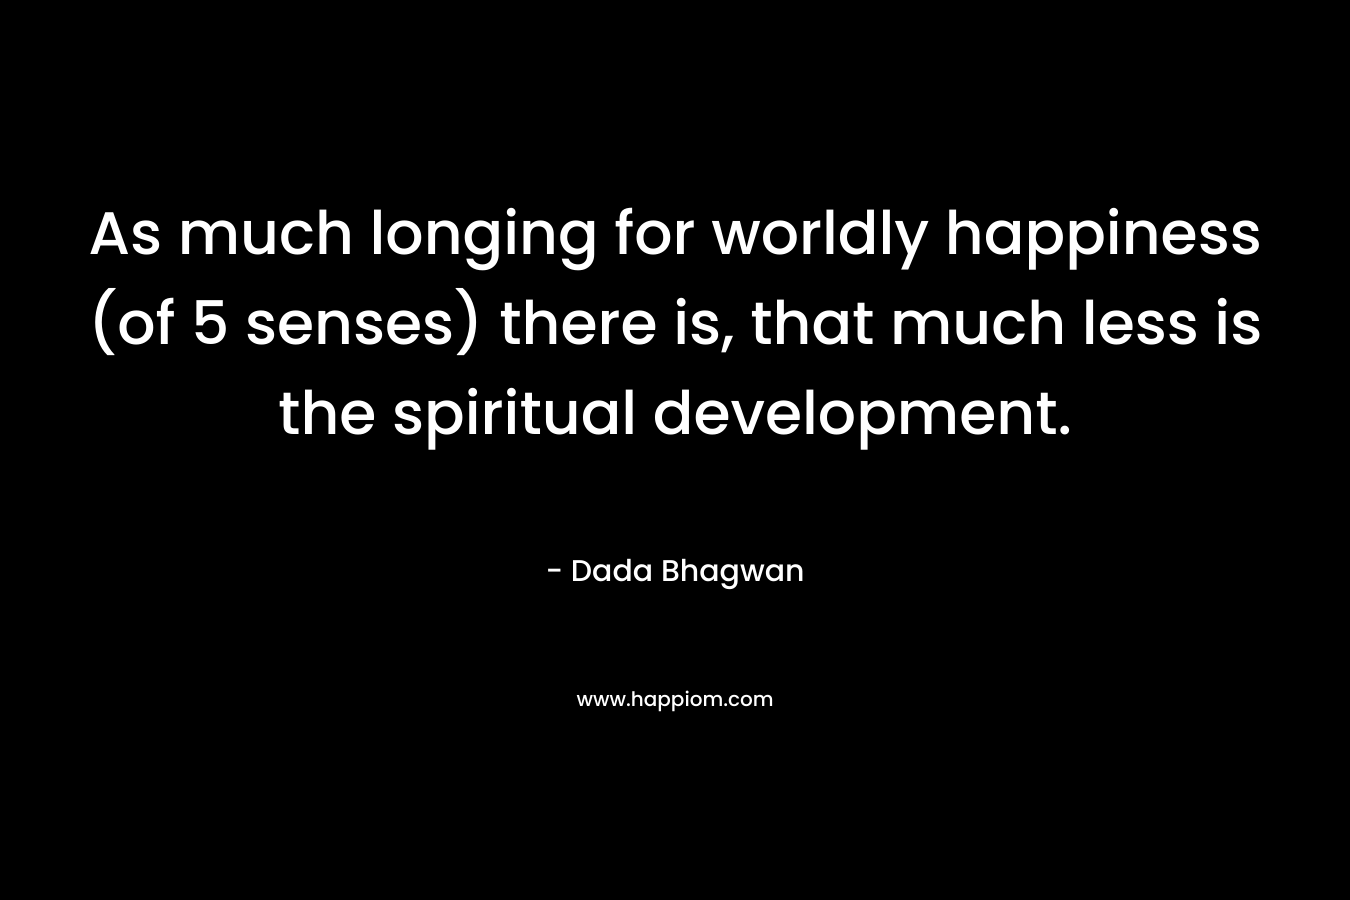 As much longing for worldly happiness (of 5 senses) there is, that much less is the spiritual development.